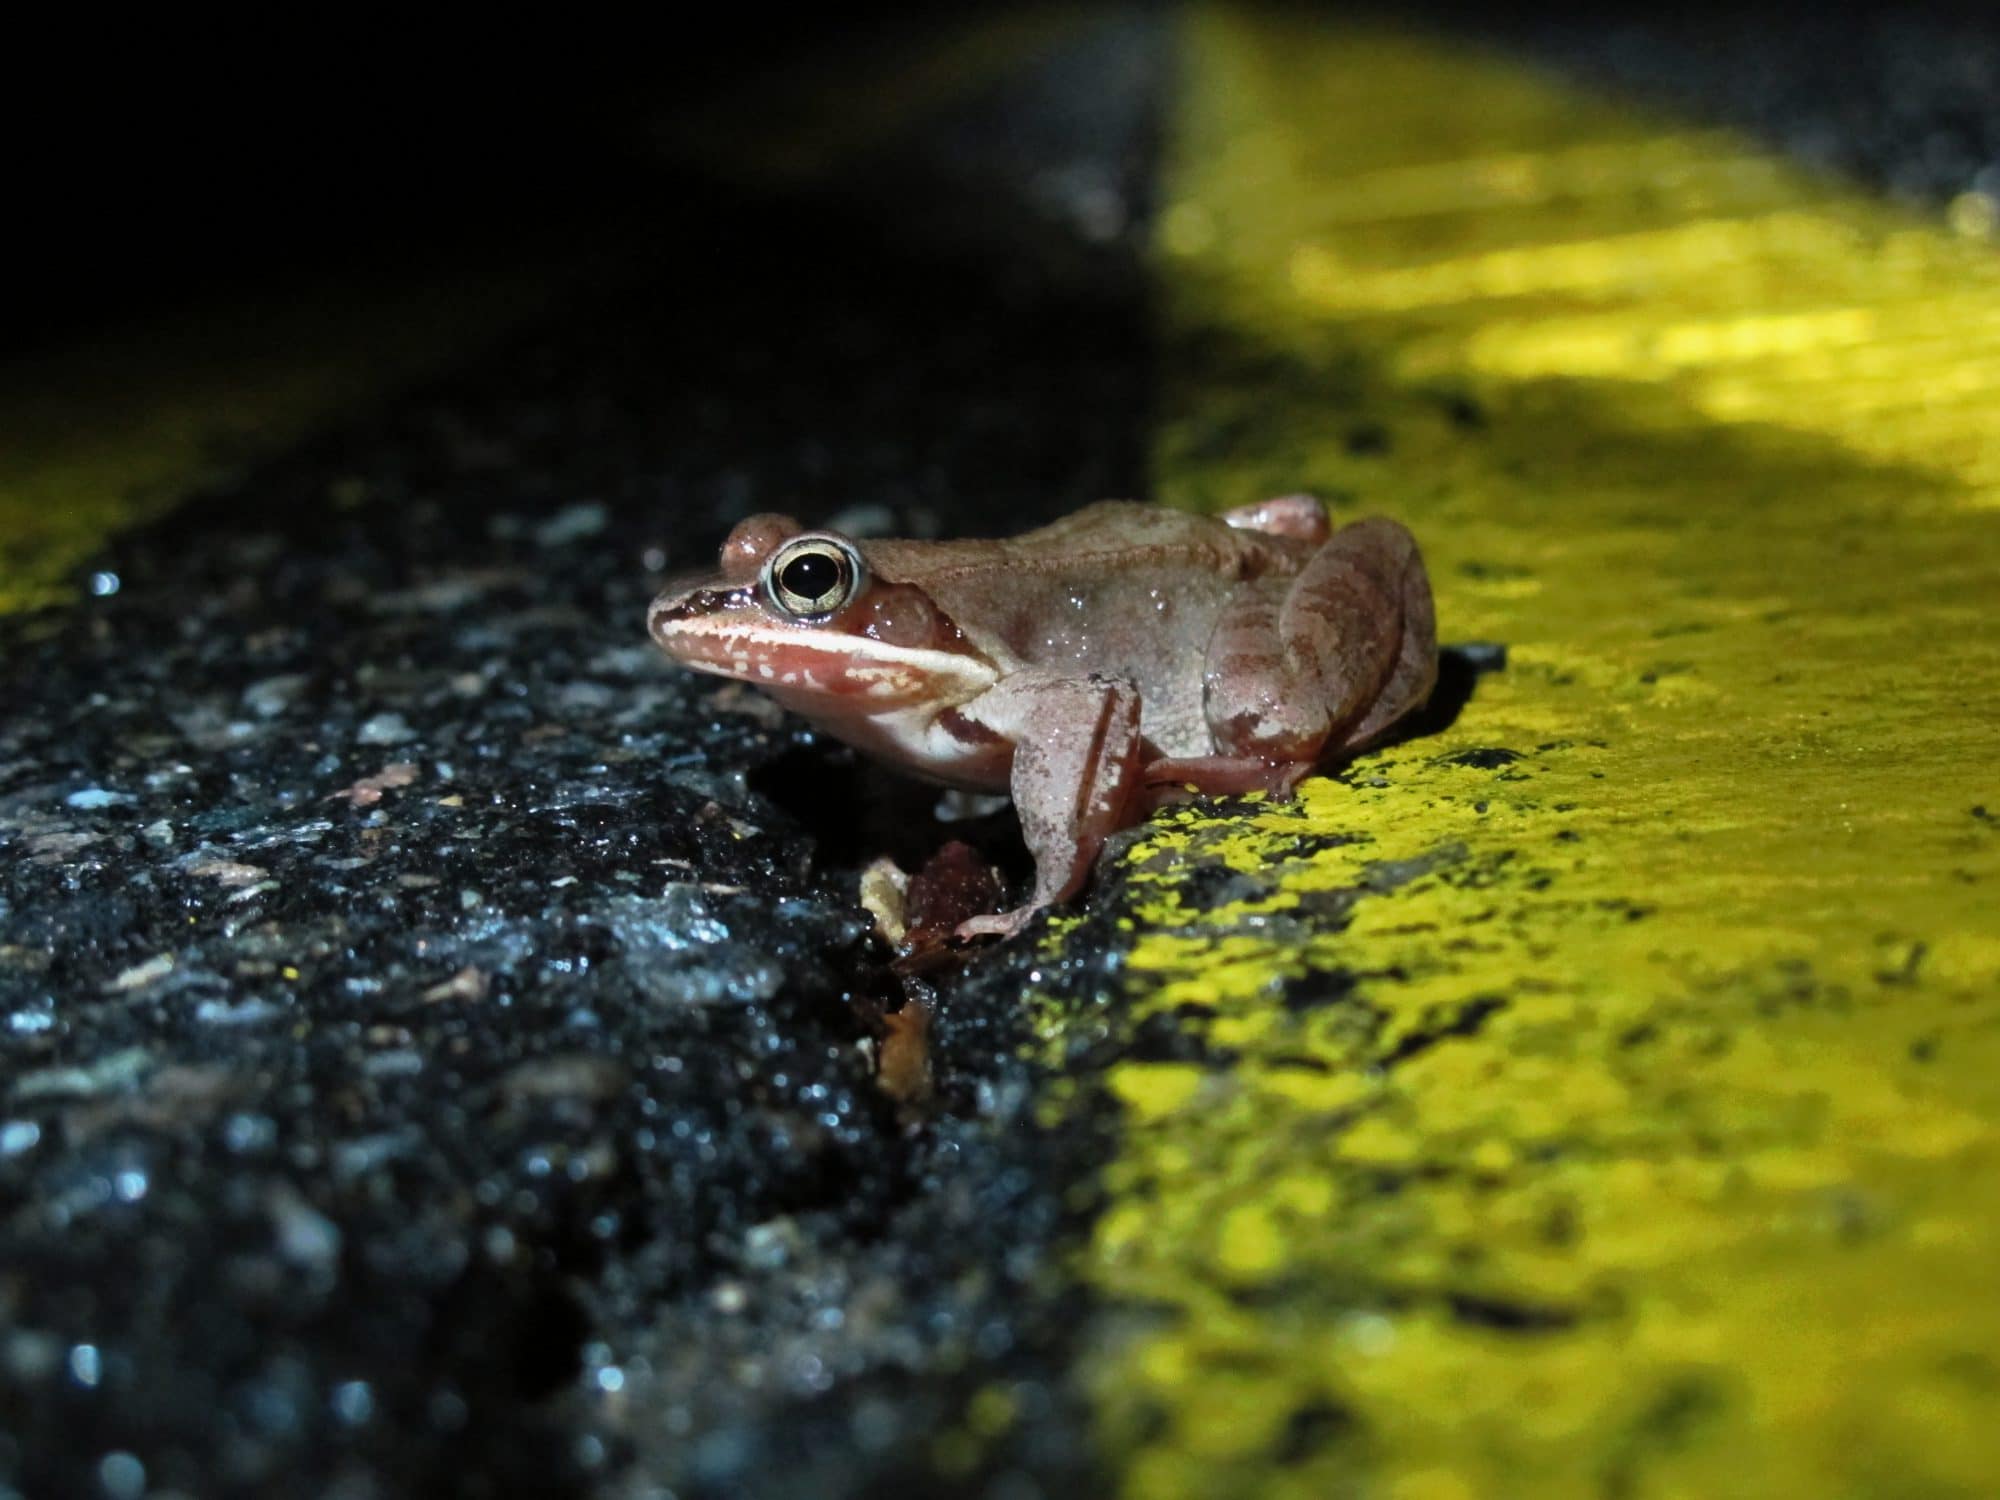 A wood frog pauses on North Lincoln Street in Keene on March 16. (photo © Brett Amy Thelen)